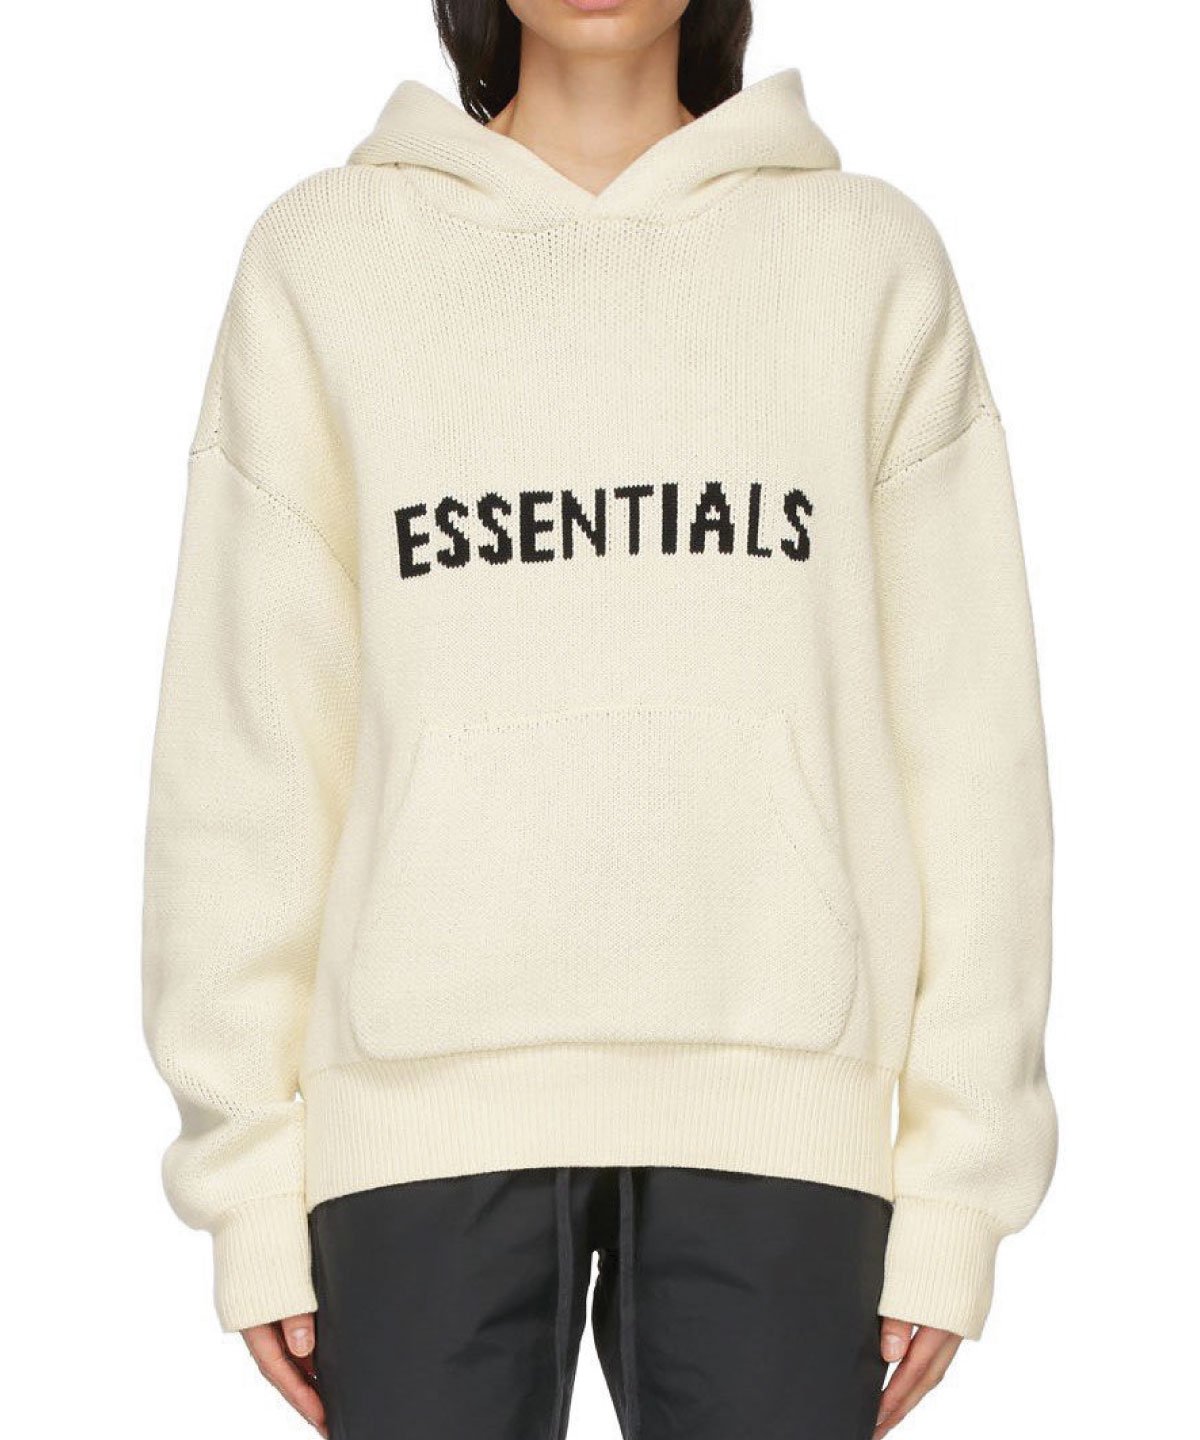 FOG ESSENTIALS ニットパーカー Fear Of God Essentials Hoodie front logo knit TAUPE